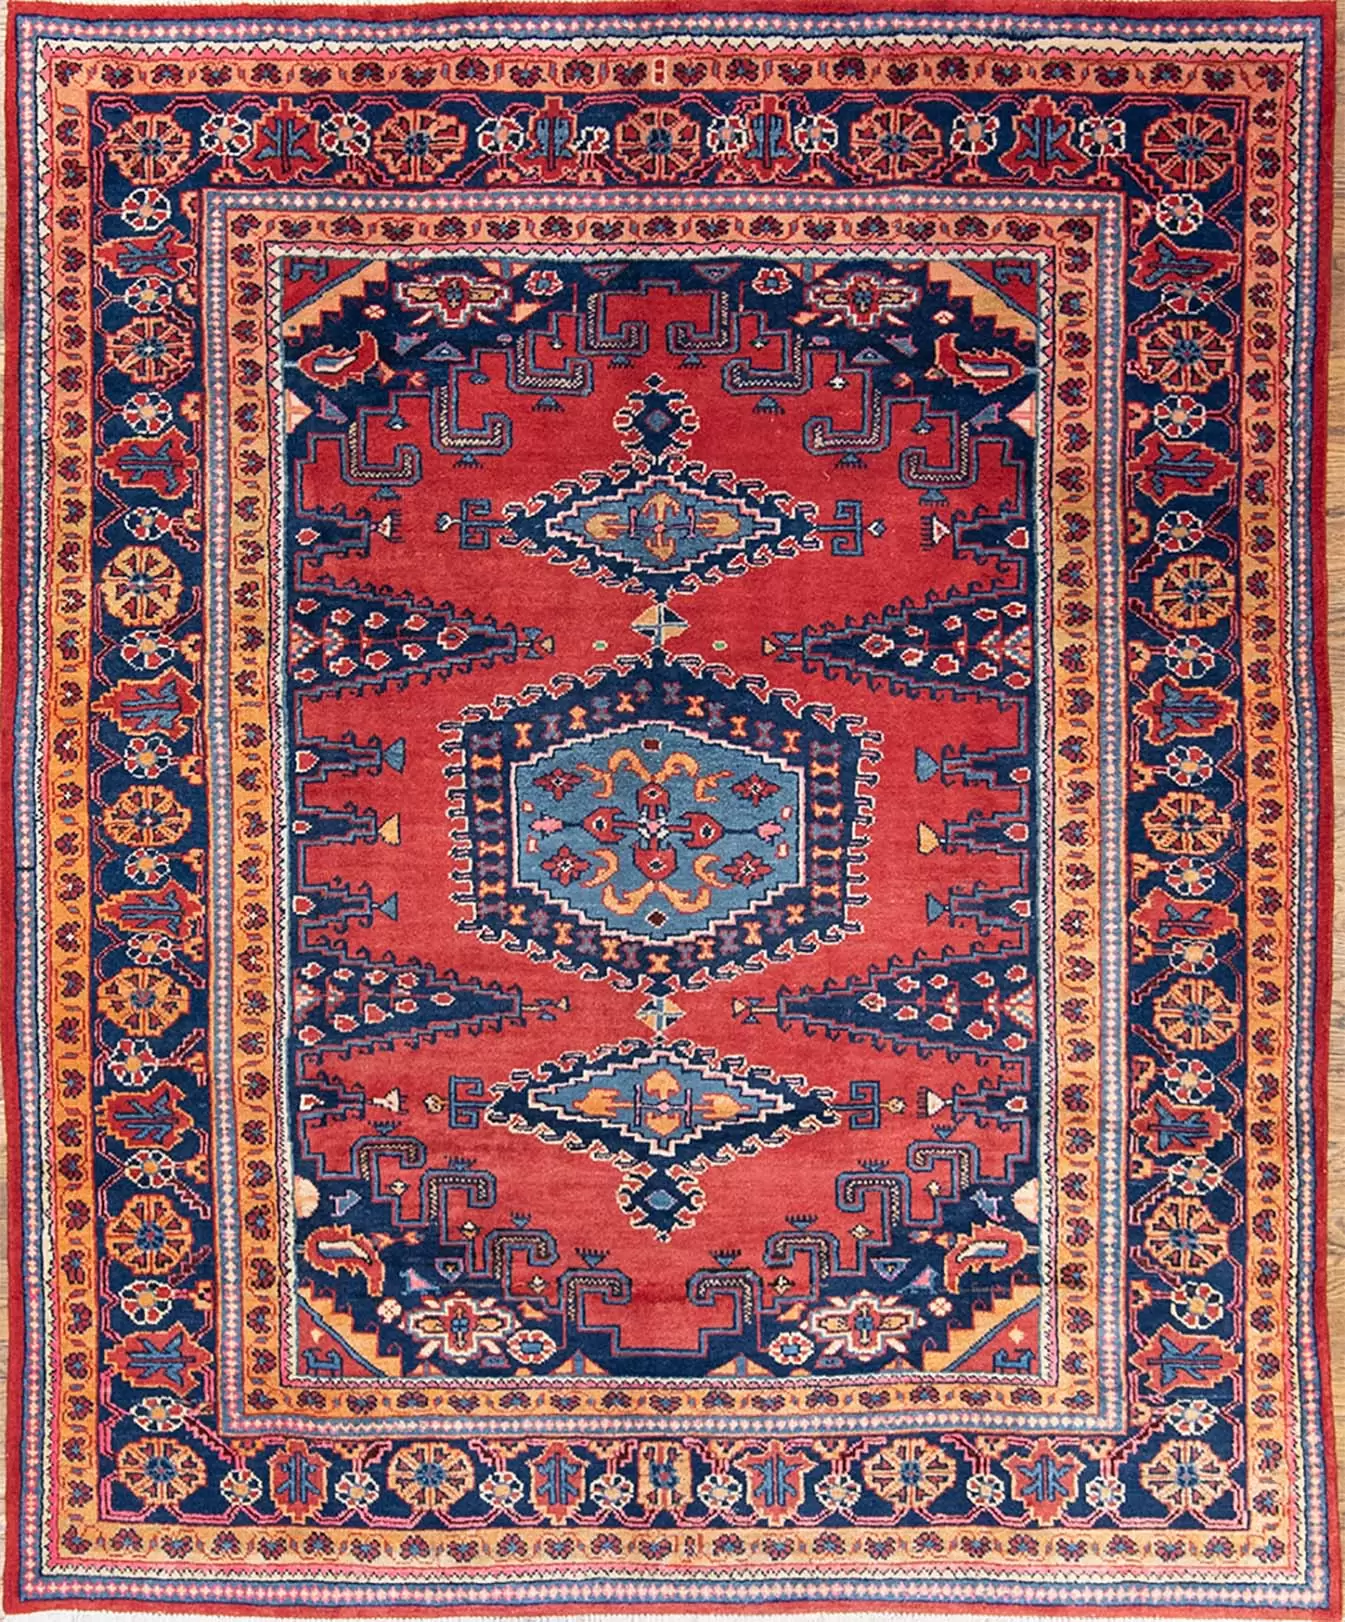 Persian tribal rug. Handmade geometric Northwest Persian rug in red and navy blue colors. Size 6.3x7.7.